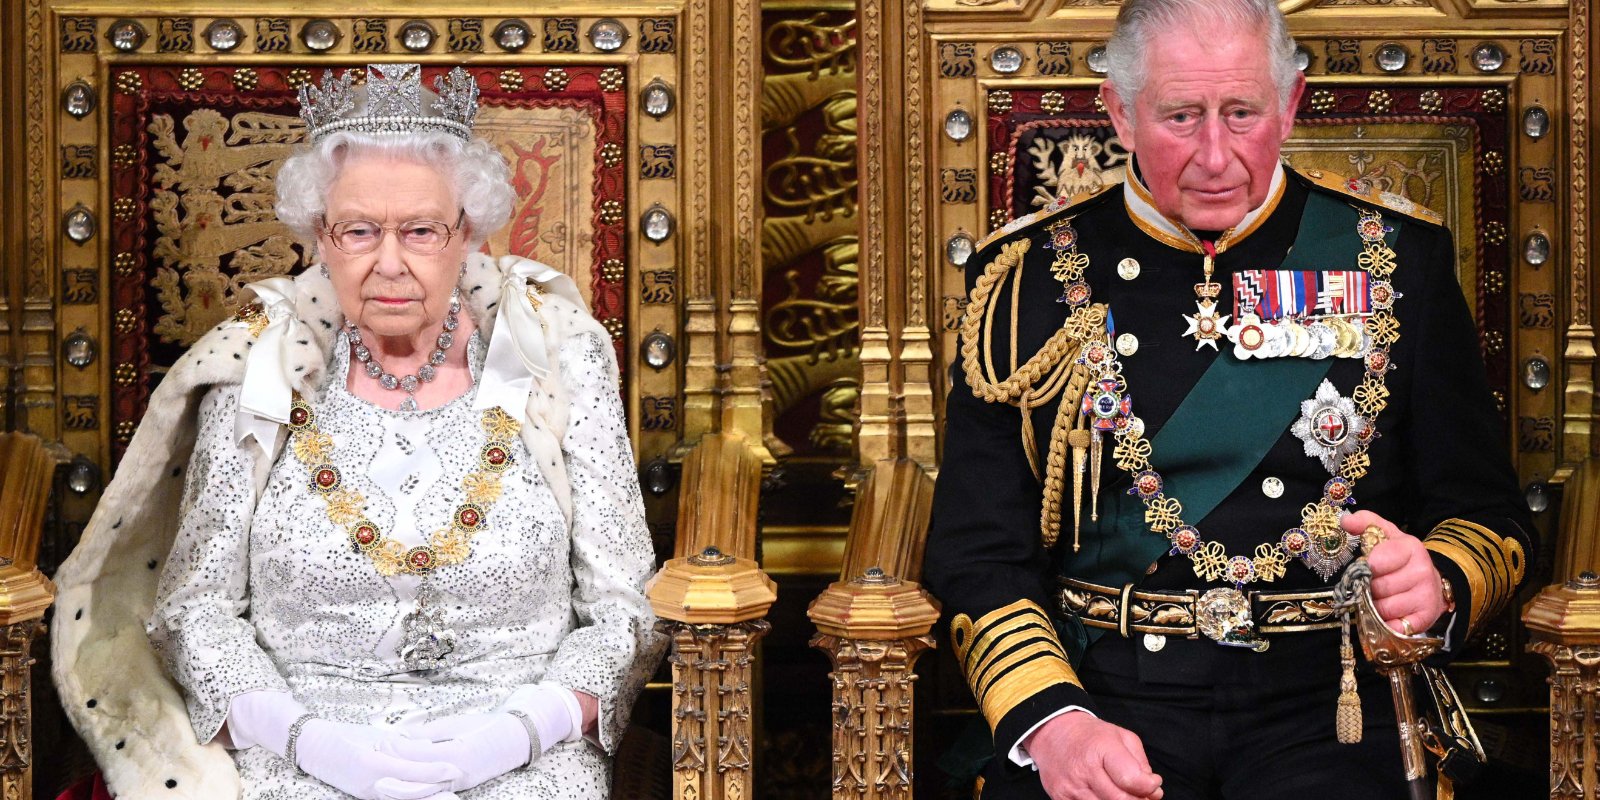 Queen Elizabeth and then Prince Charles in 2019 at the opening of Parliment.